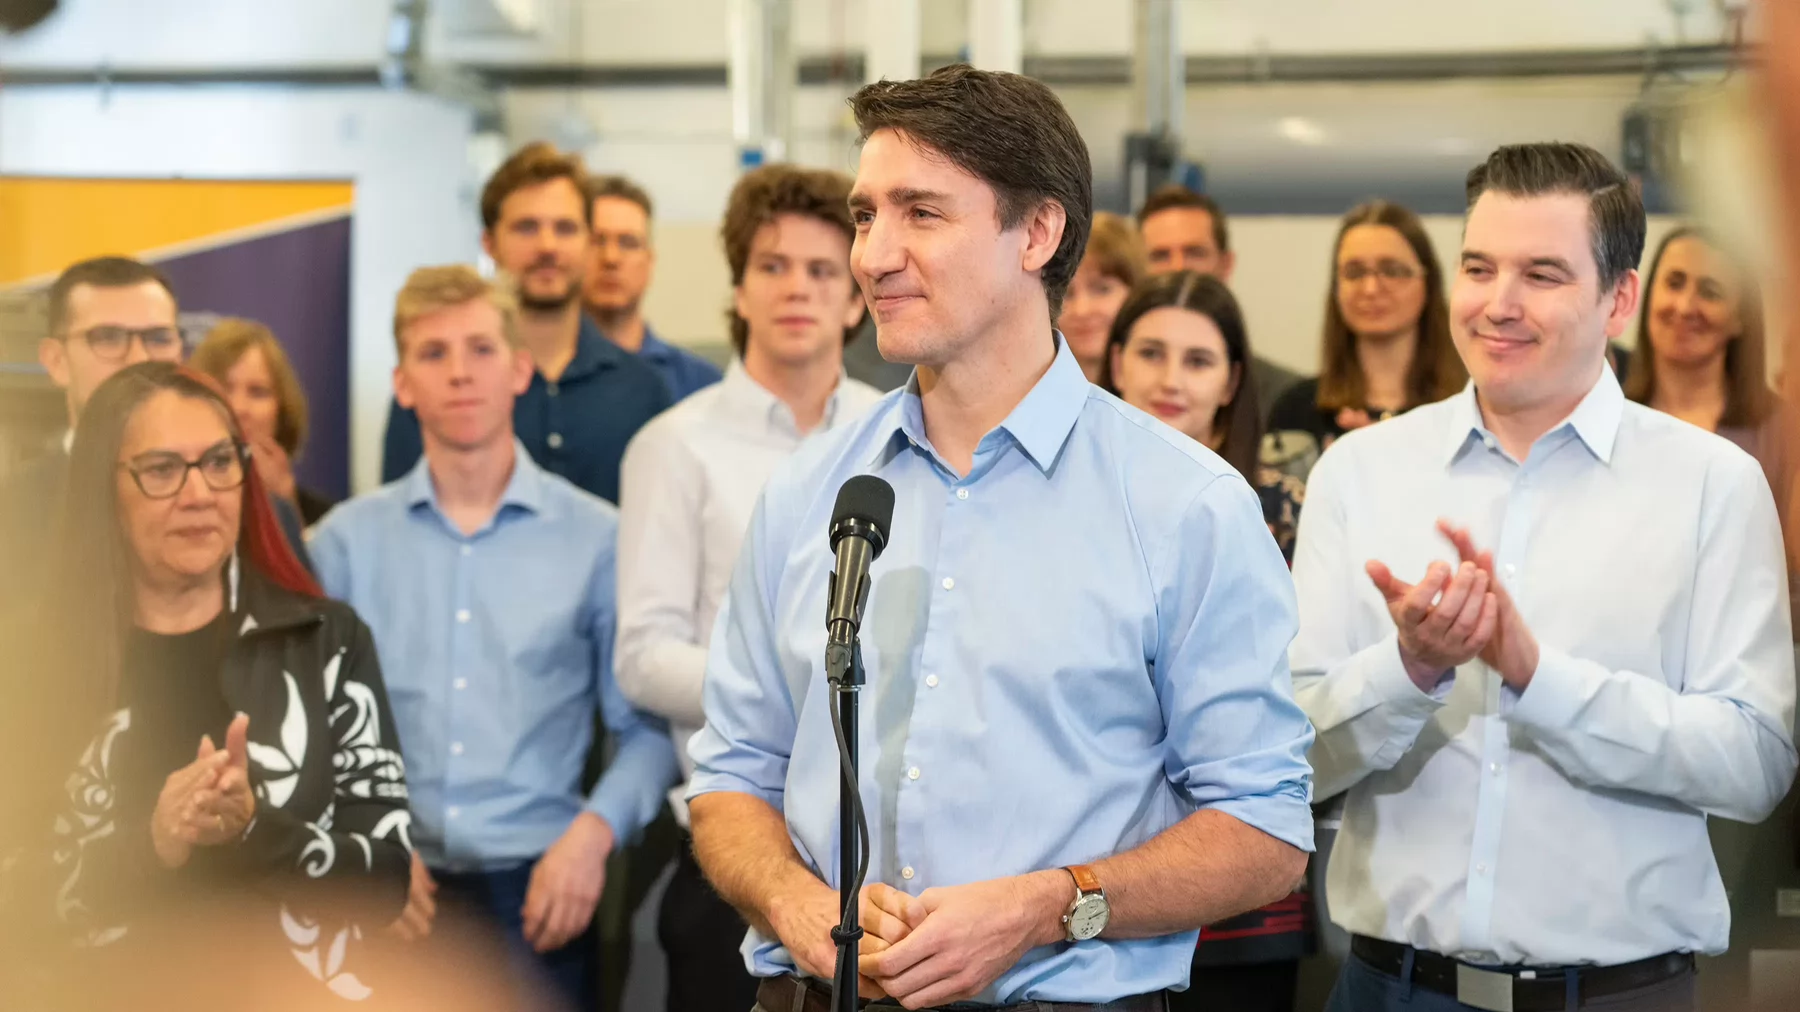 Prime Minister Justin Trudeau stands at a microphone stand smiling with people standing behind. 